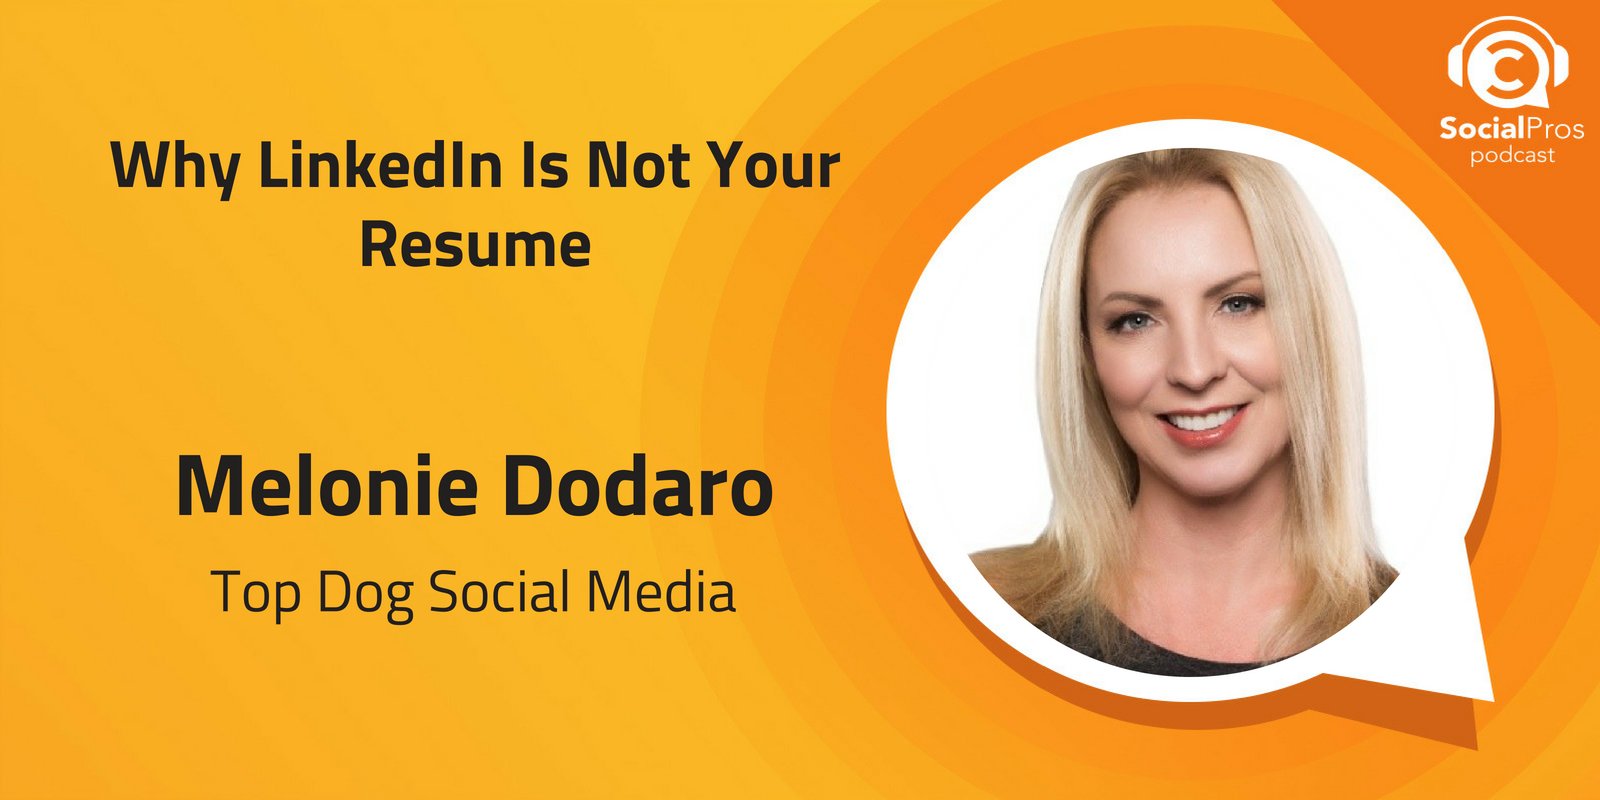 Why LinkedIn Is Not Your Resume